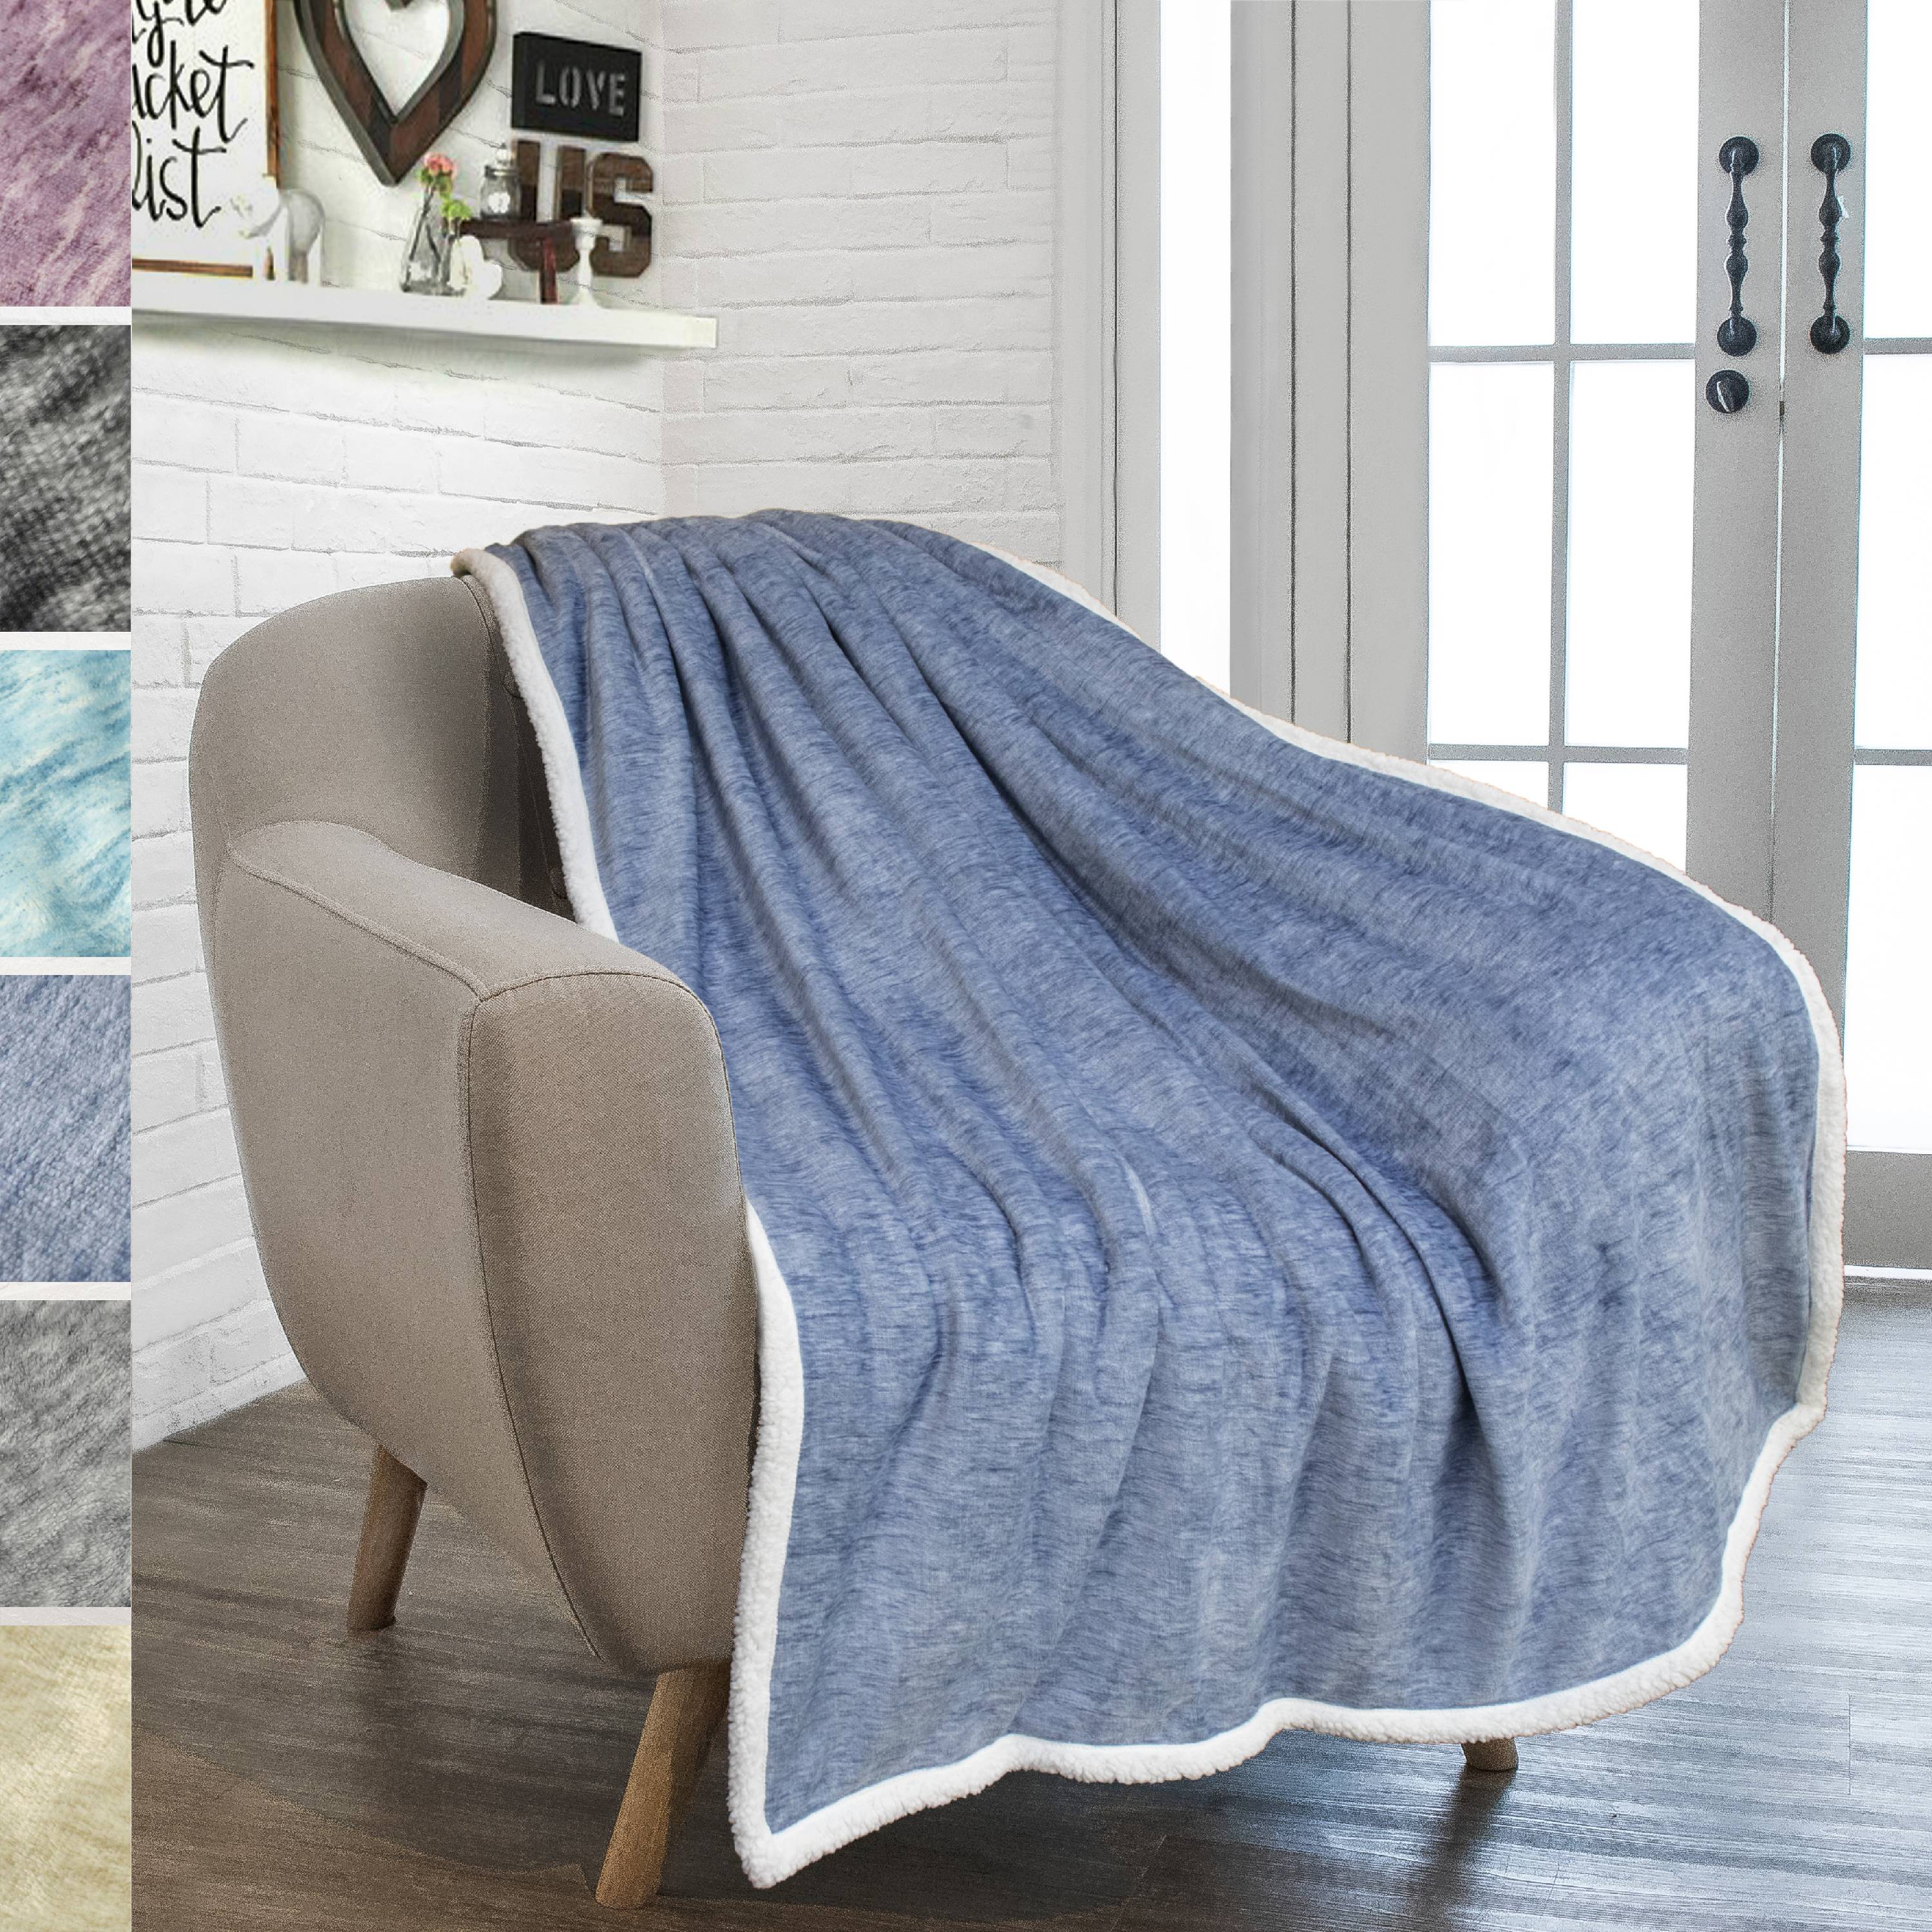 Gray and White 40x50Inch Super Soft Throw Blankets Bohemian Mandala Floral Luxury Comfort Fleece Bed Cover Cozy Warm Lightweight Blanket for Sofa Couch Chair 